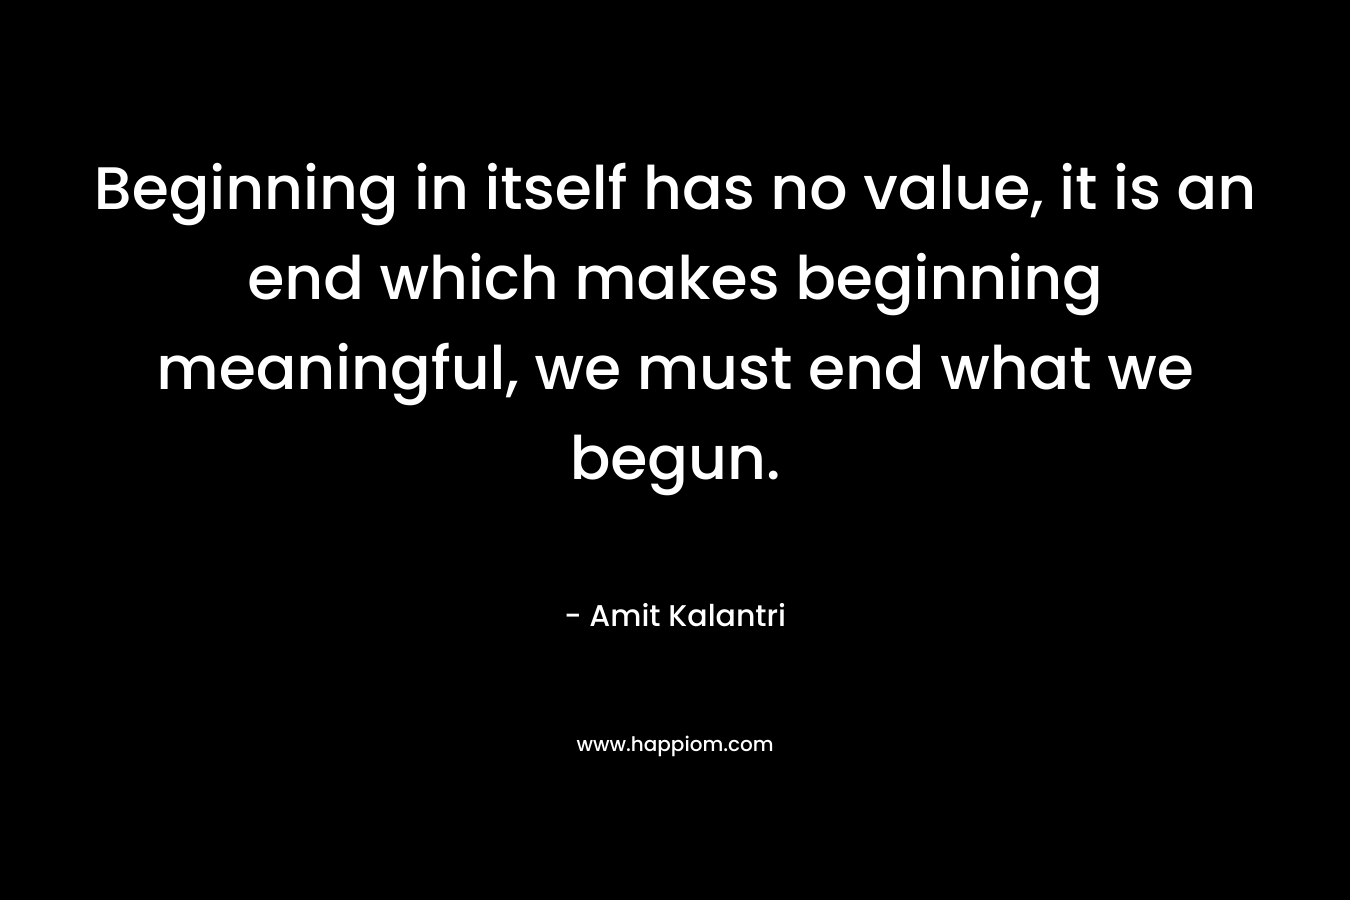 Beginning in itself has no value, it is an end which makes beginning meaningful, we must end what we begun.